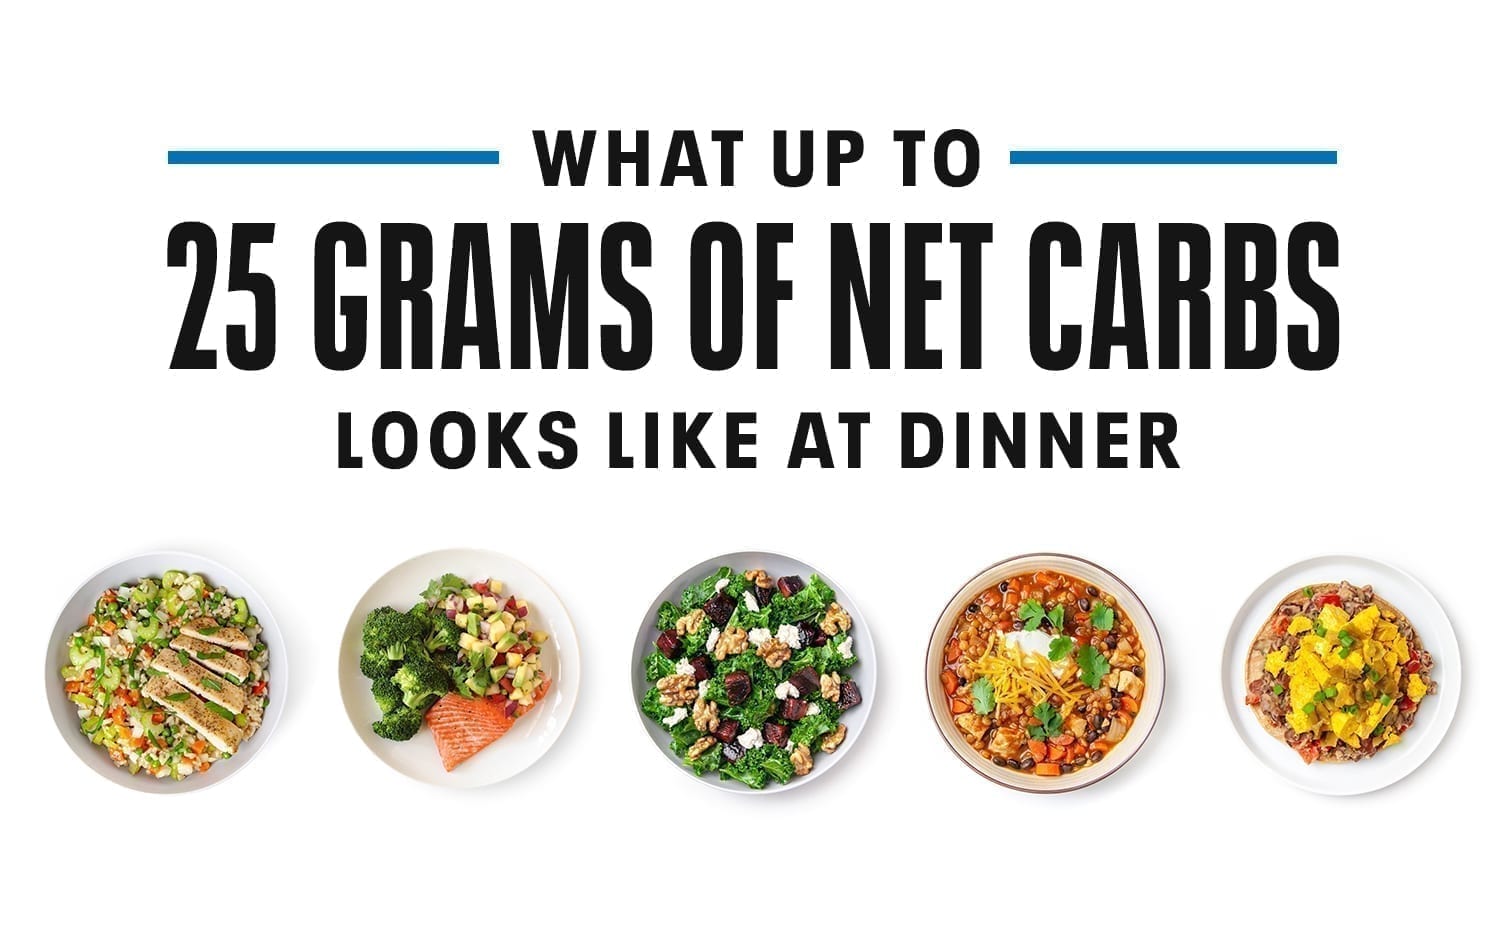 What Dinners With up to 25 Grams of Net Carbs Look Like